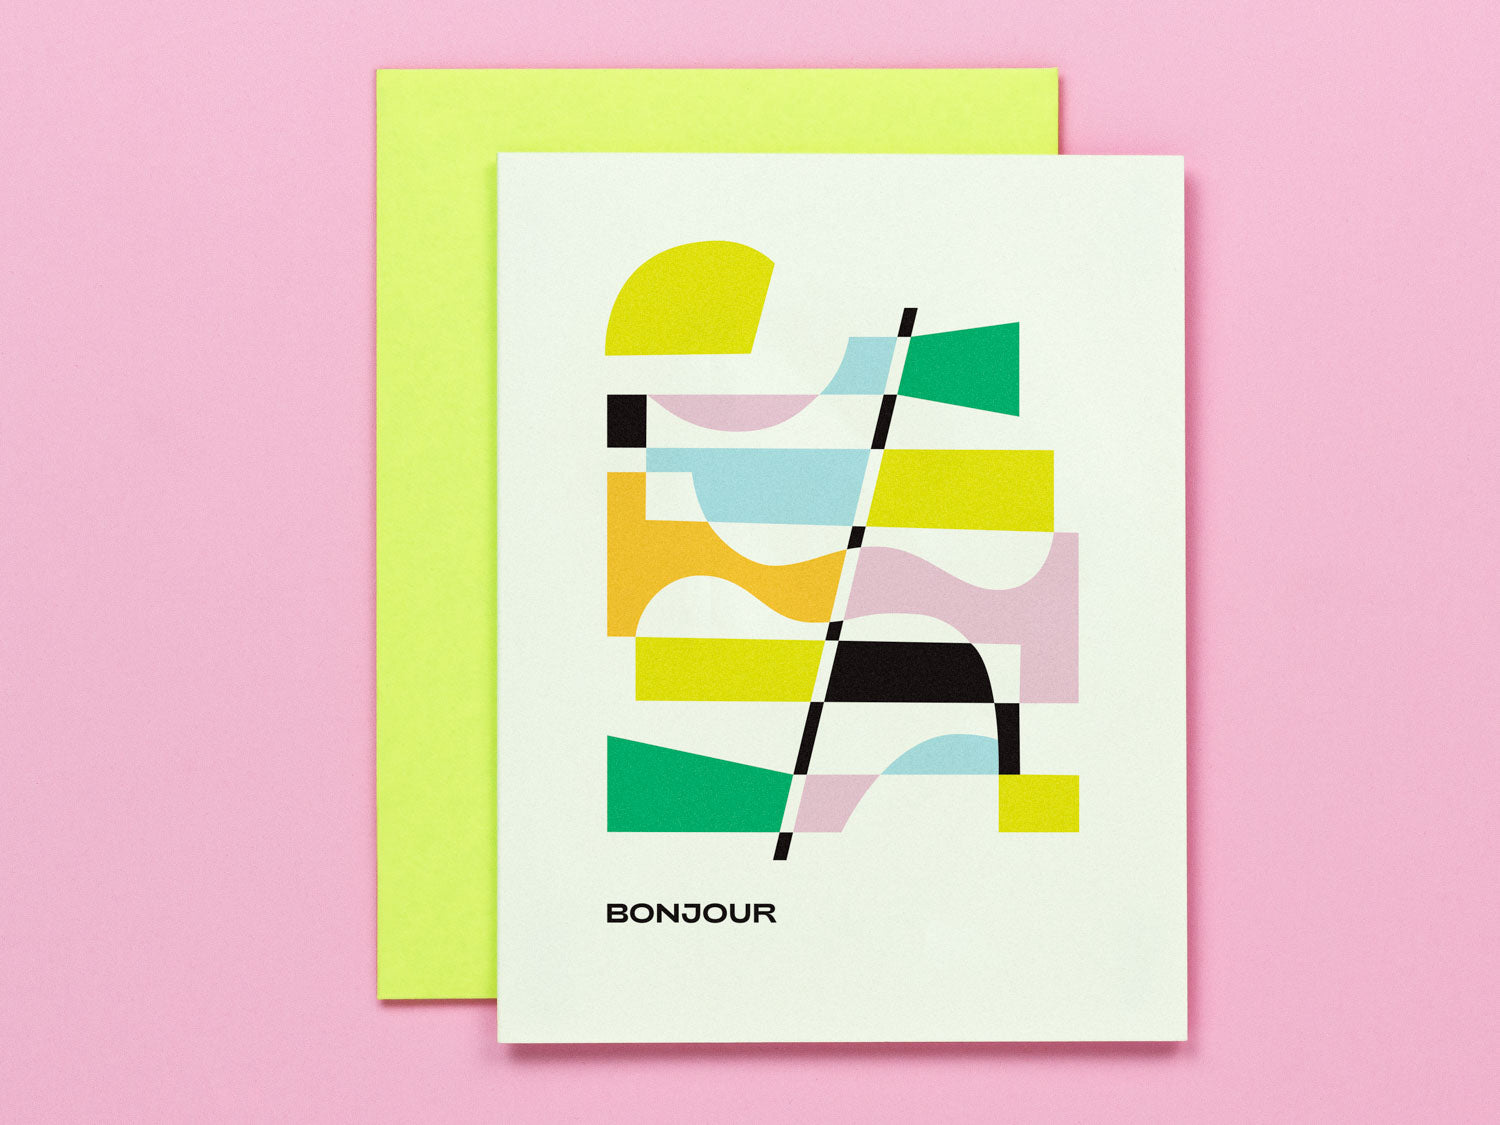 Bonjour Hello card with abstract vaguely art deco inspired design. Made in USA by My Darlin' @mydarlin_bk